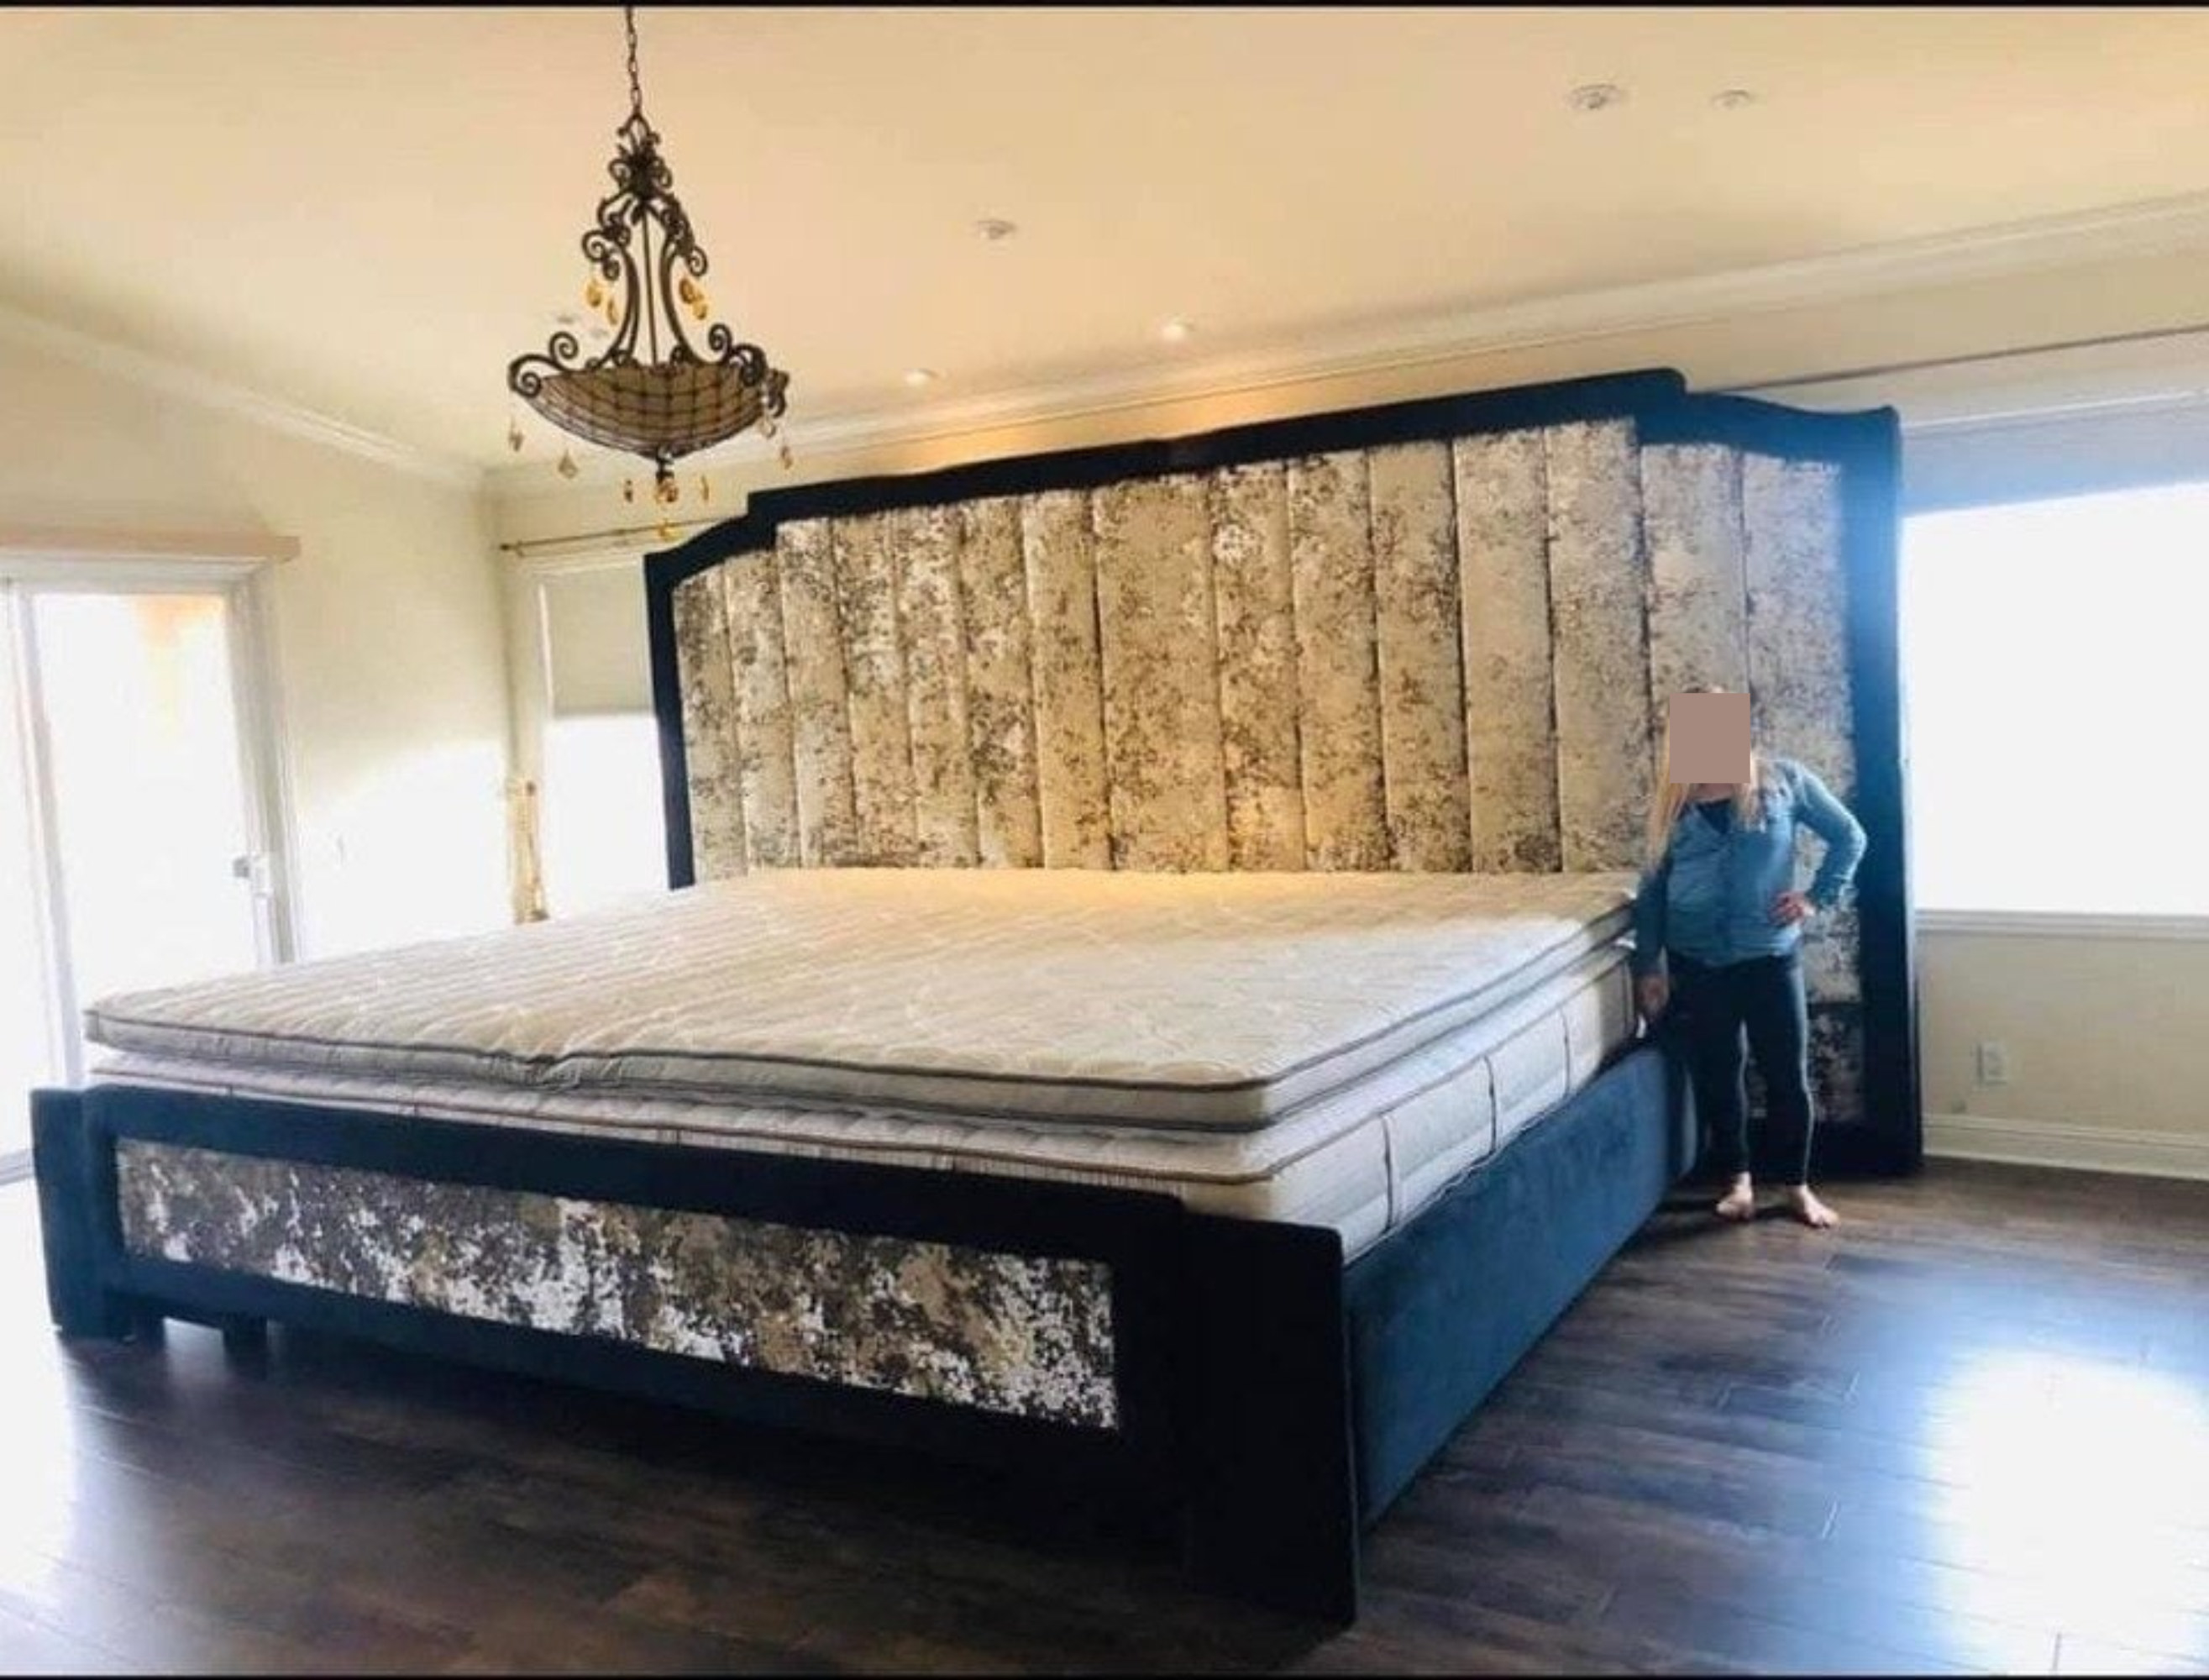 A giant bed